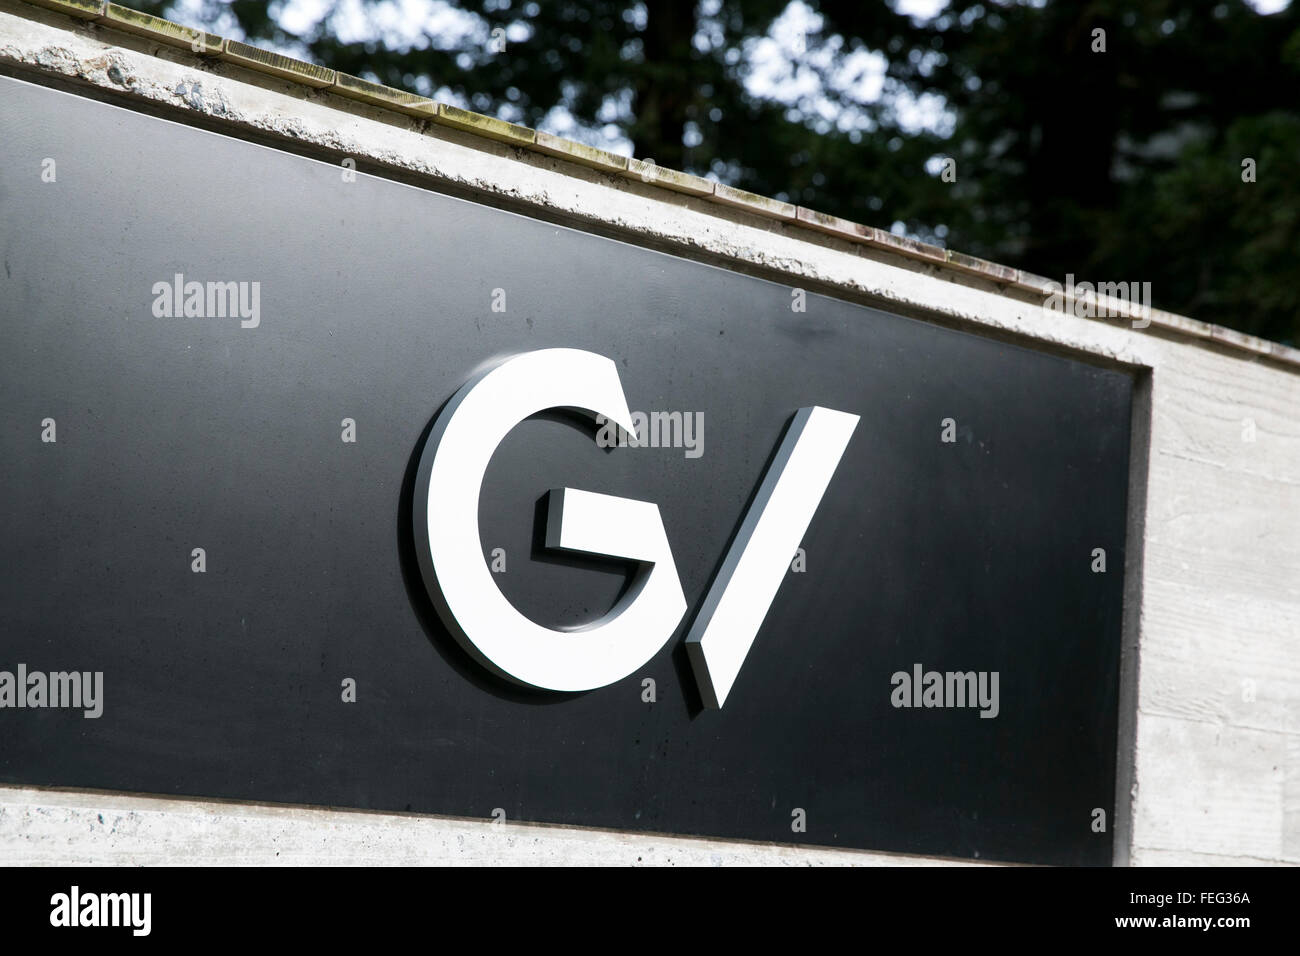 A logo sign outside of the headquarters of GV, also known as Google Ventures in Mountain View, California on January 24, 2016. Stock Photo